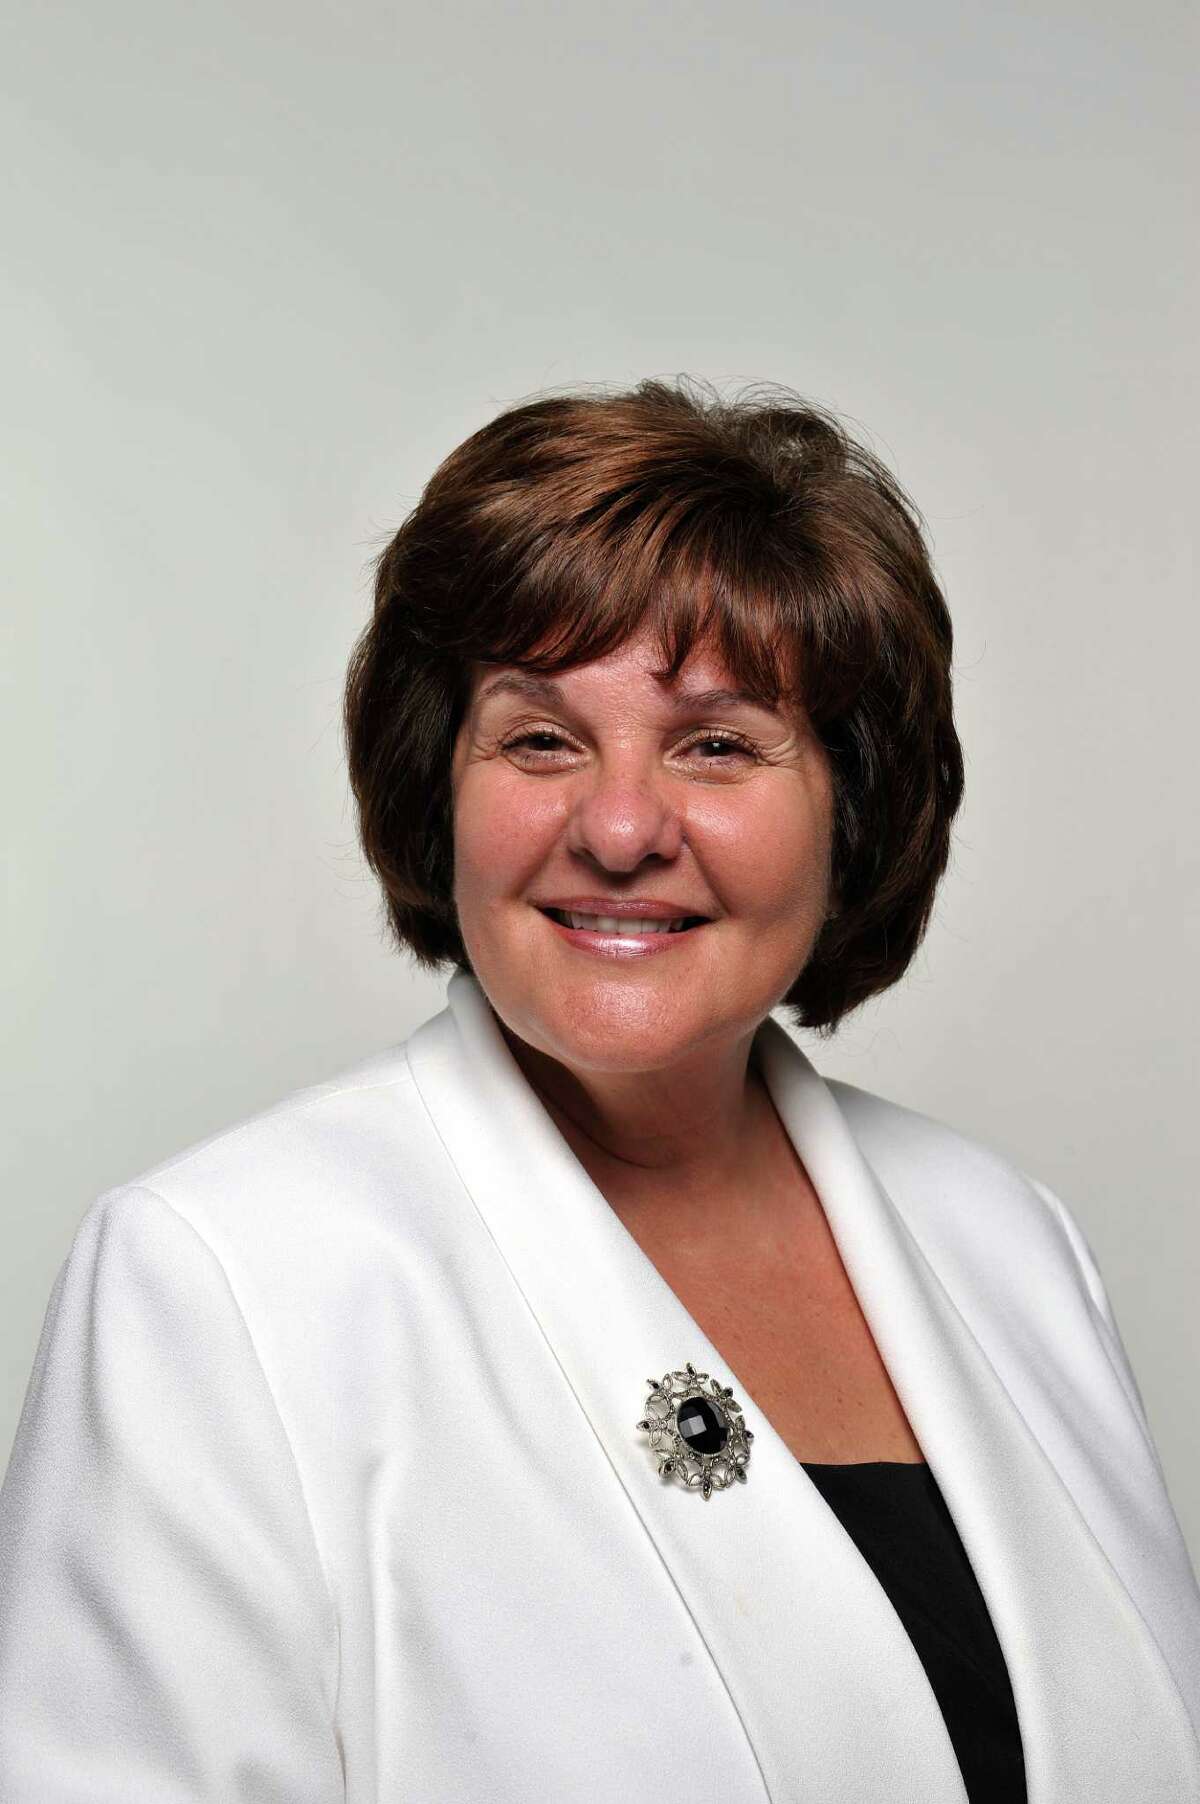 State Senator Kathy Marchione: "I felt push-back when I moved from town clerk – traditionally a woman's role – to supervisor. At the beginning, I would be running a meeting and hear jokes meant to distract me. I would put a stop to it and move on."